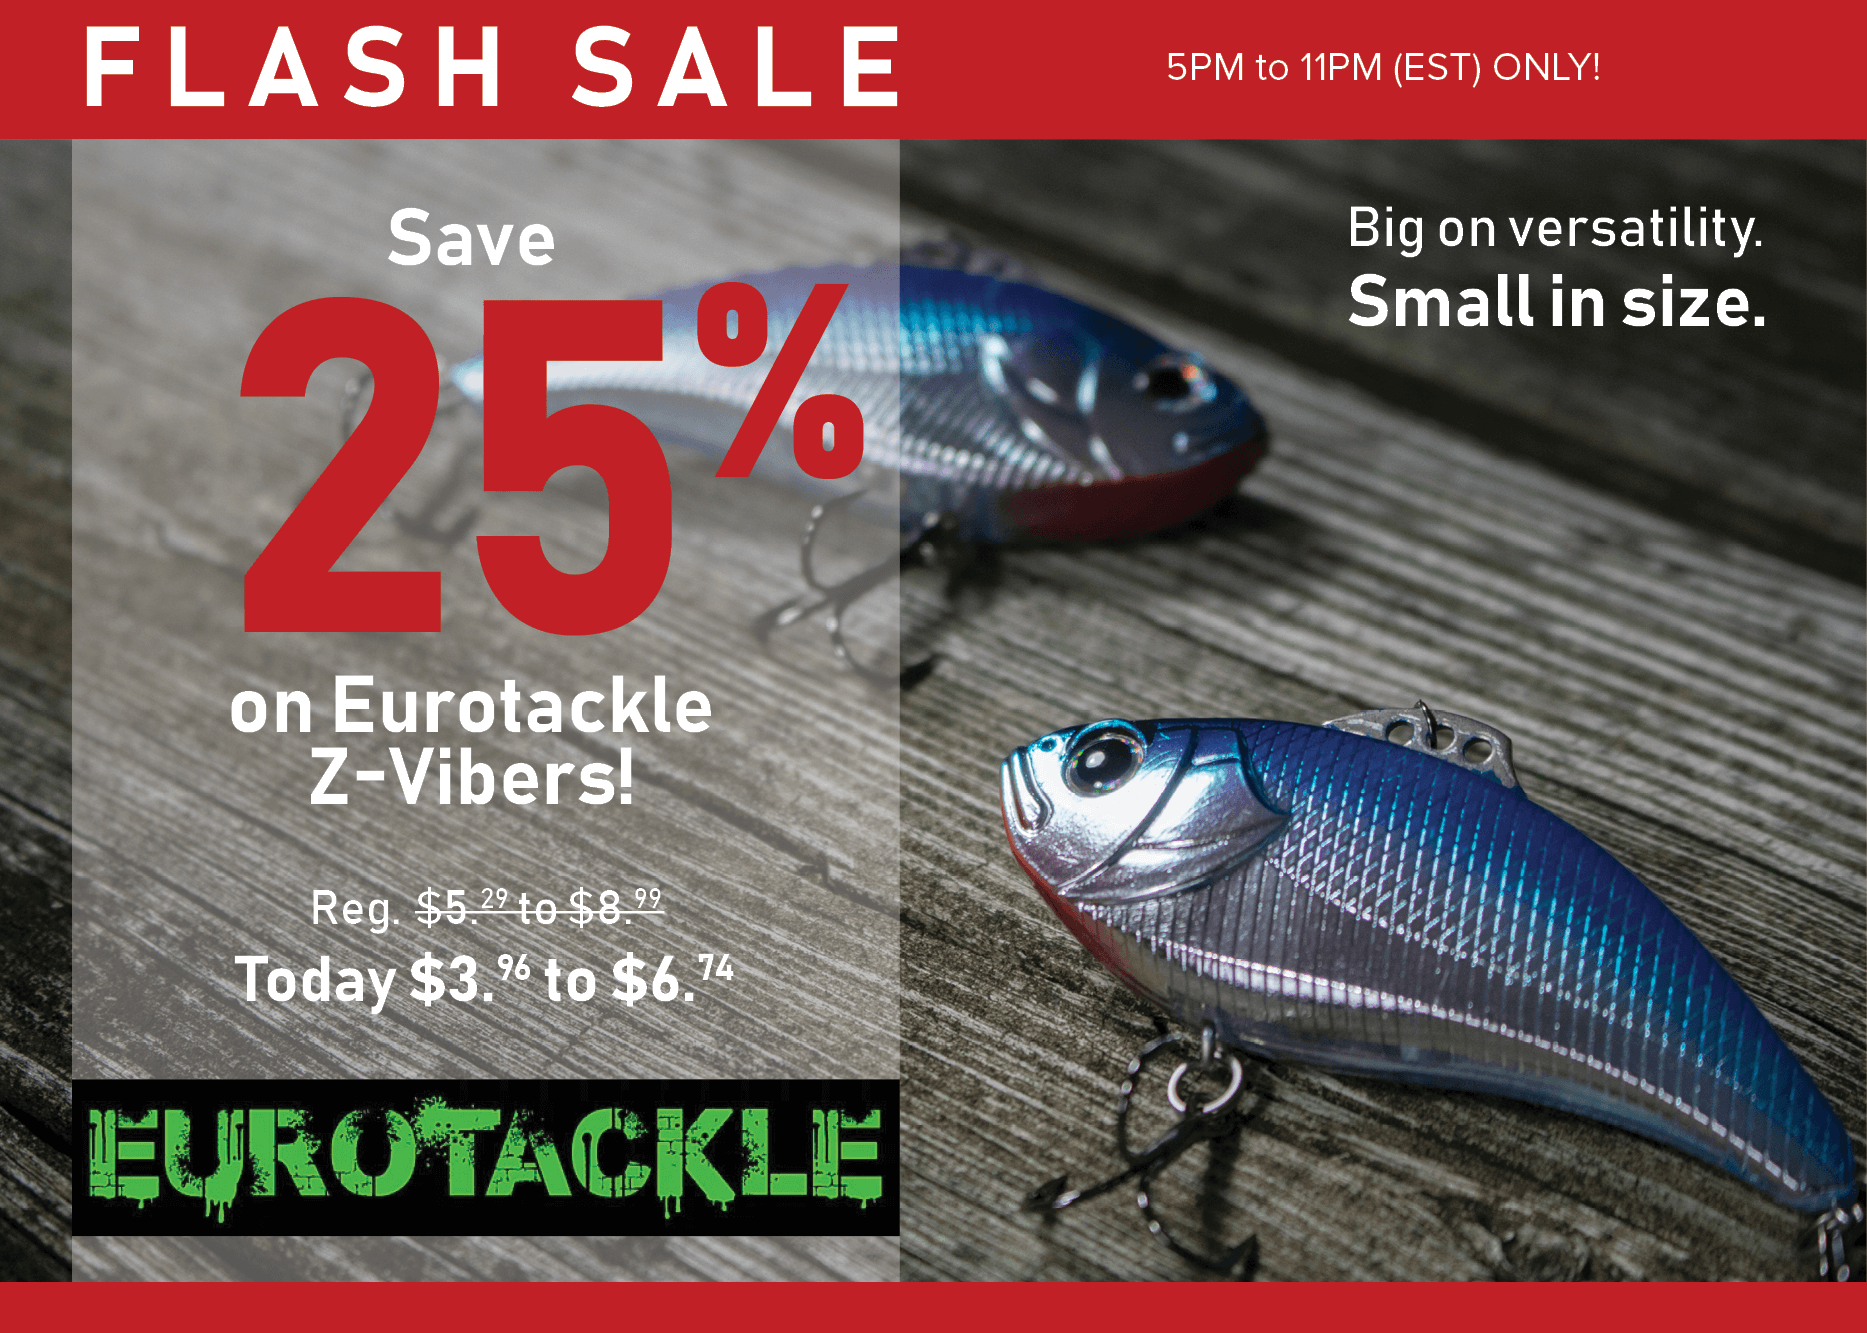 Save 25% on Eurotackle Z-Vibers, tonight only.